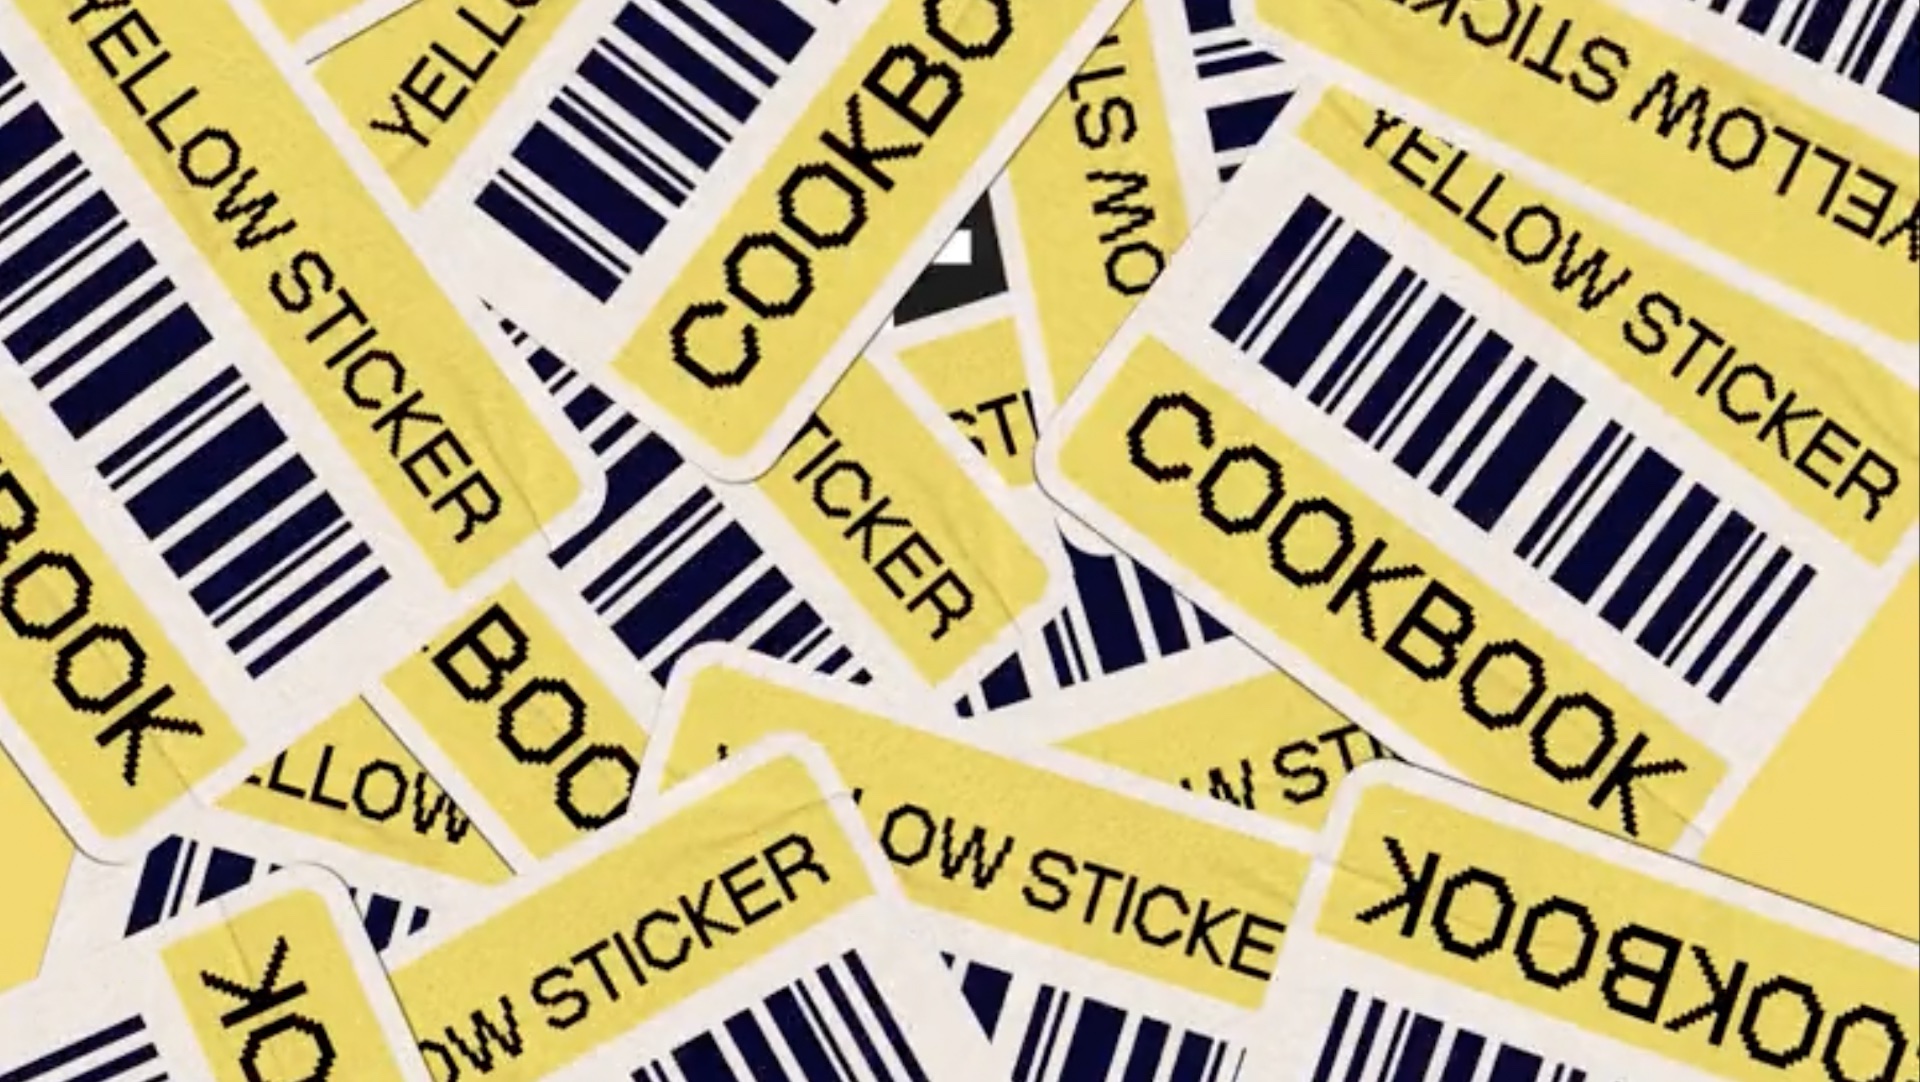 yellow stickers similar to those on reduced items in supermarkets fill the screen